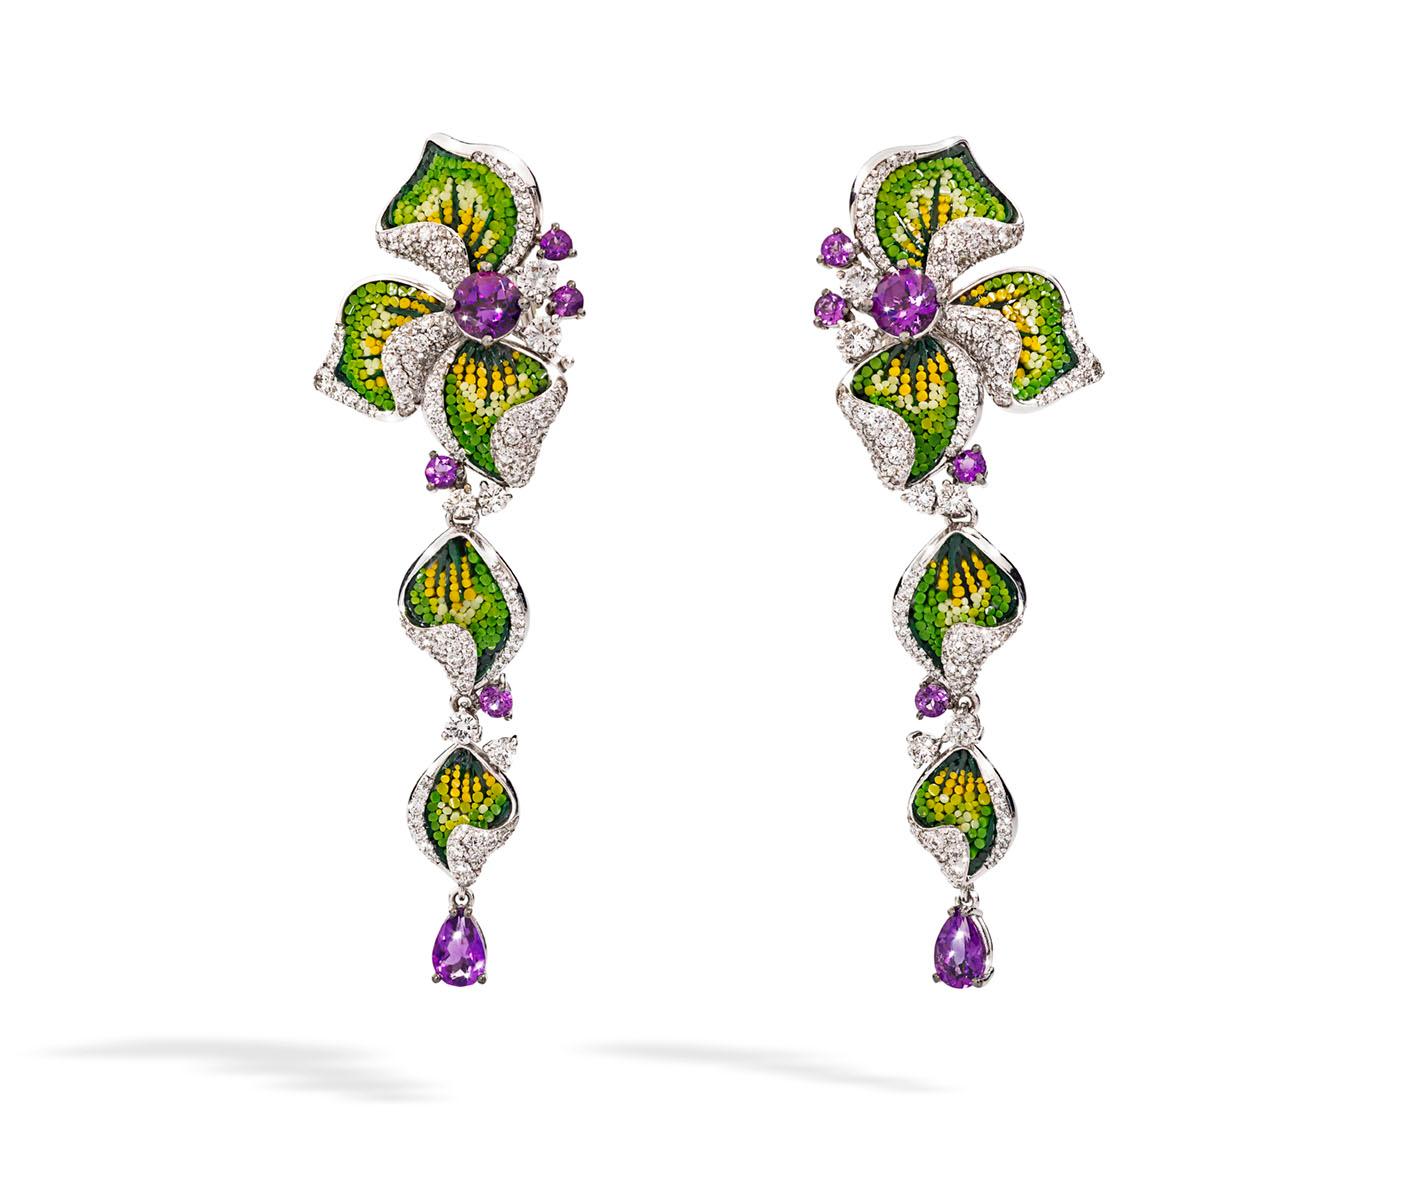 Brilliant Cut Earrings White Gold White Diamonds Amethyst HandDecorated With MicroMosaic For Sale